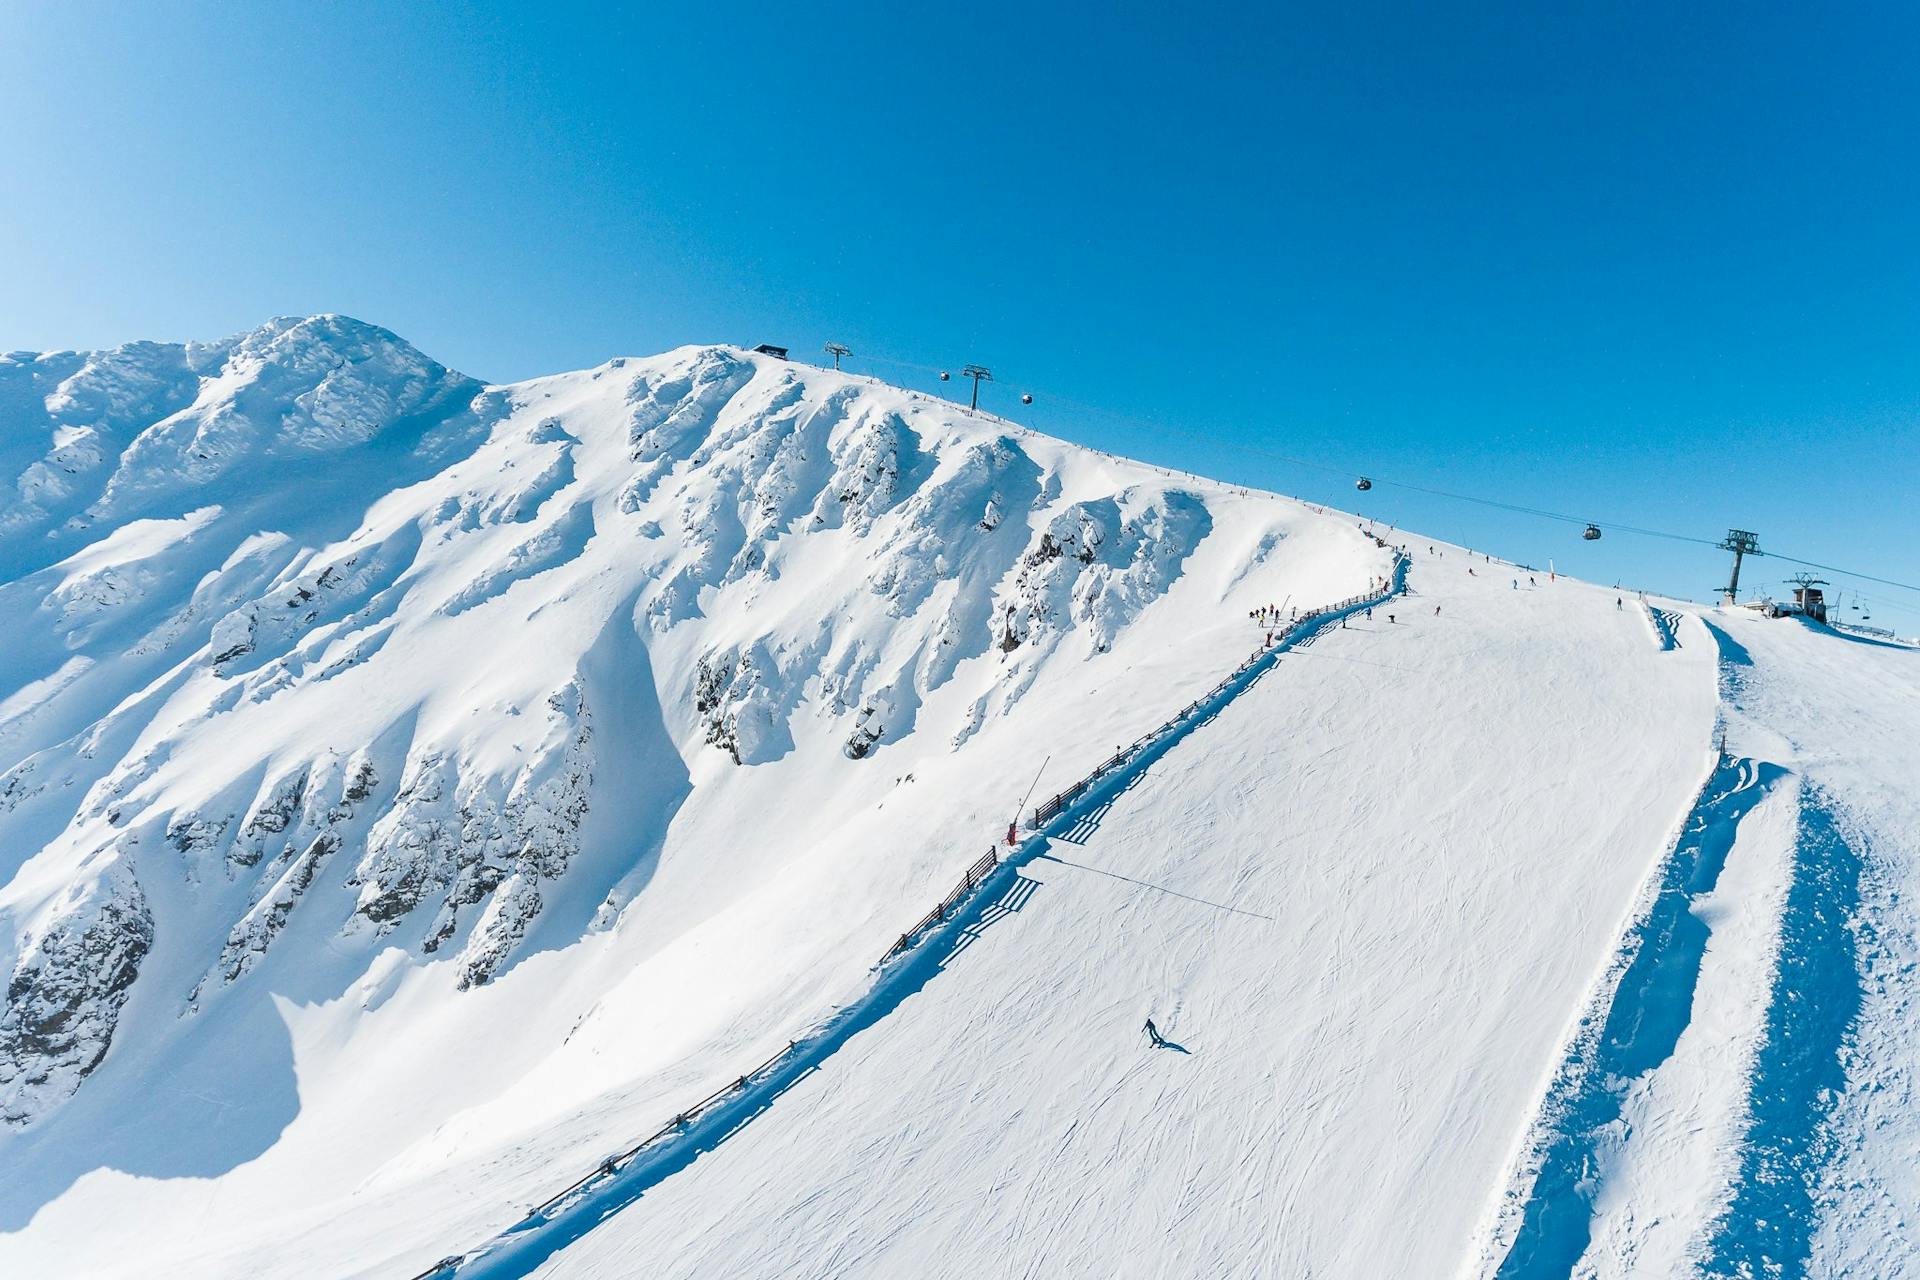 Lone skier carving down wide open ski slope